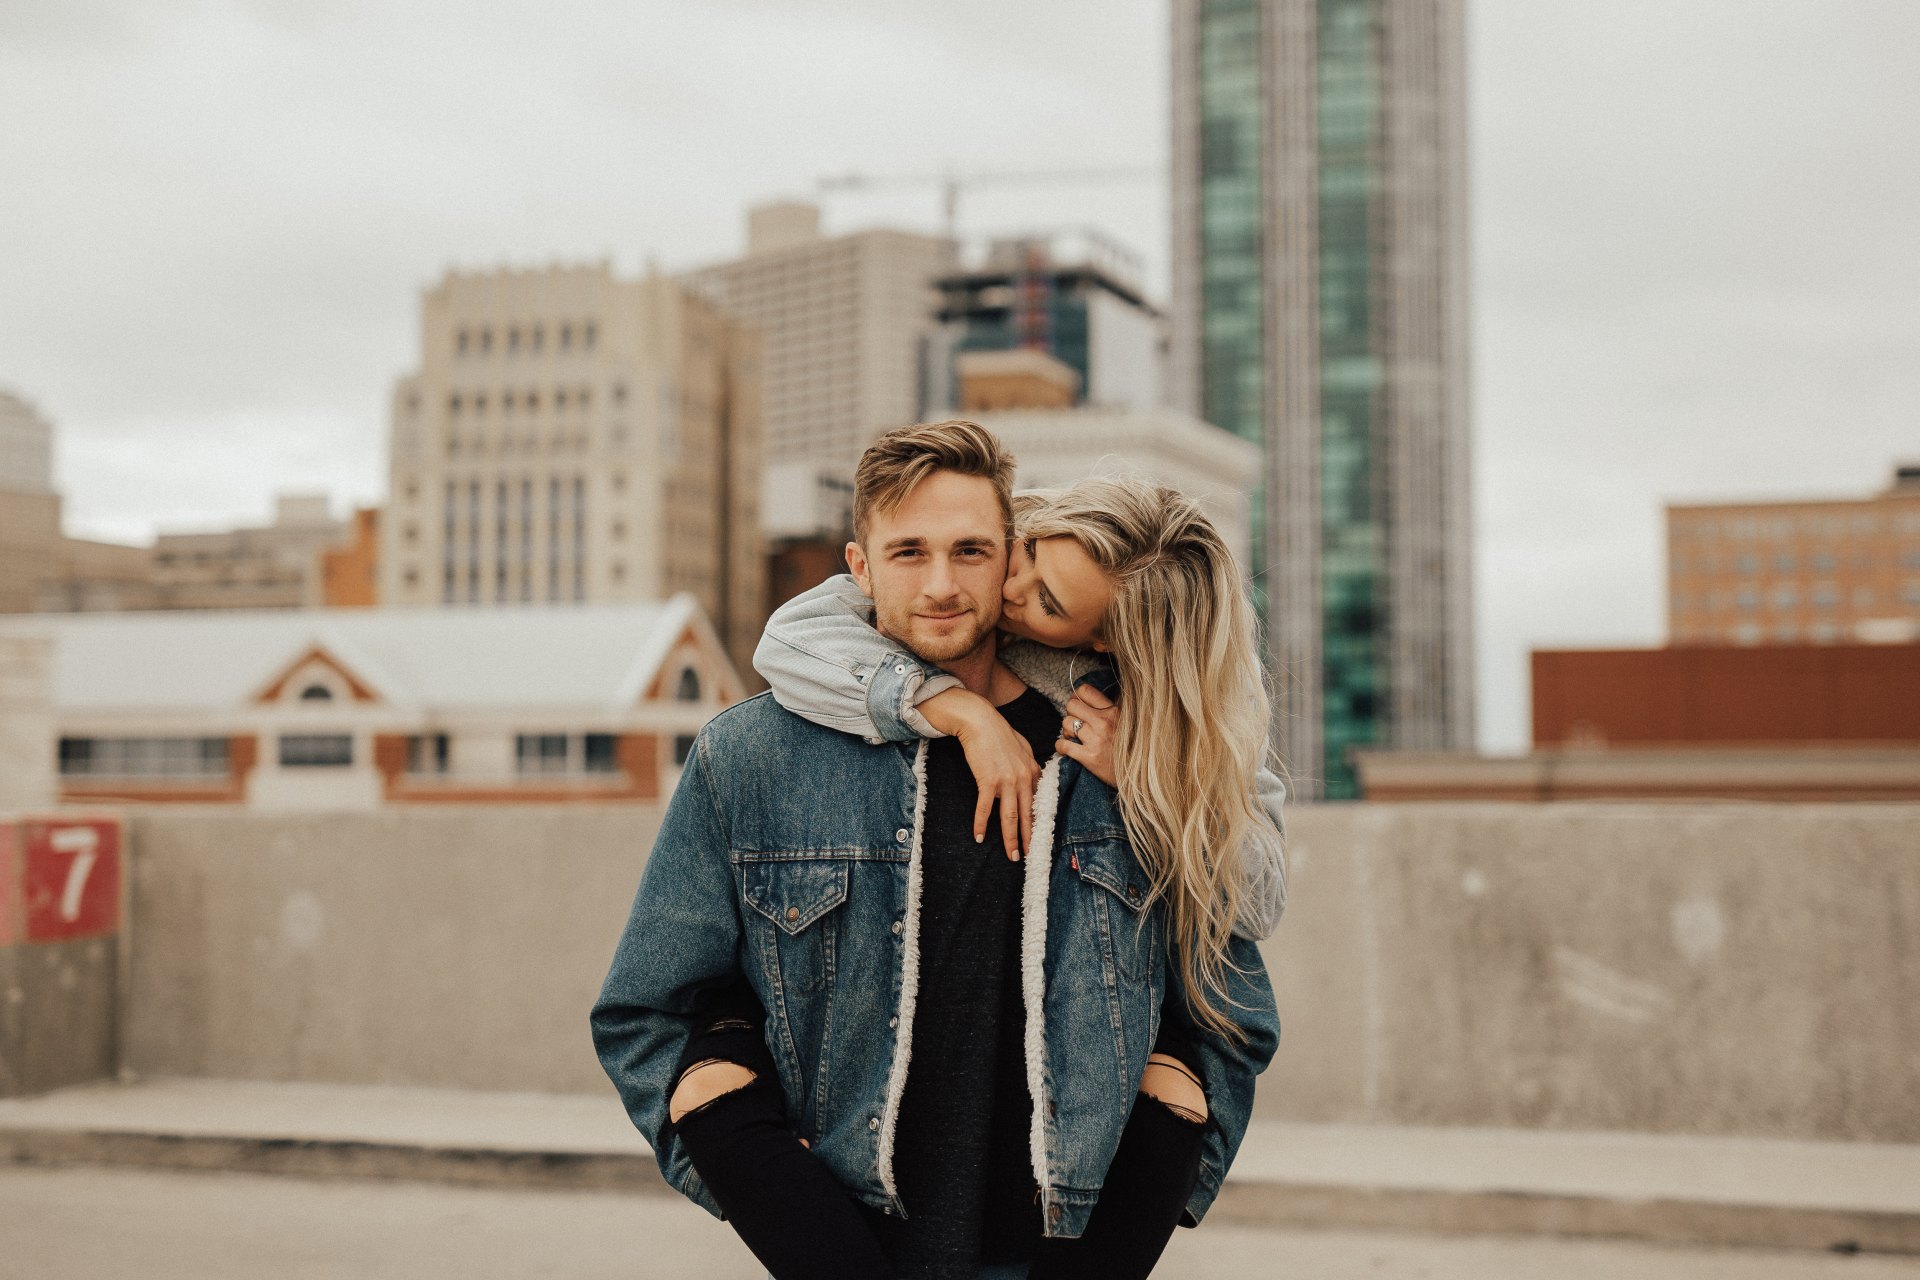 If You Want A Healthy Relationship These Are The Top 3 Zodiac Signs You Should Date, Based On Your Sign